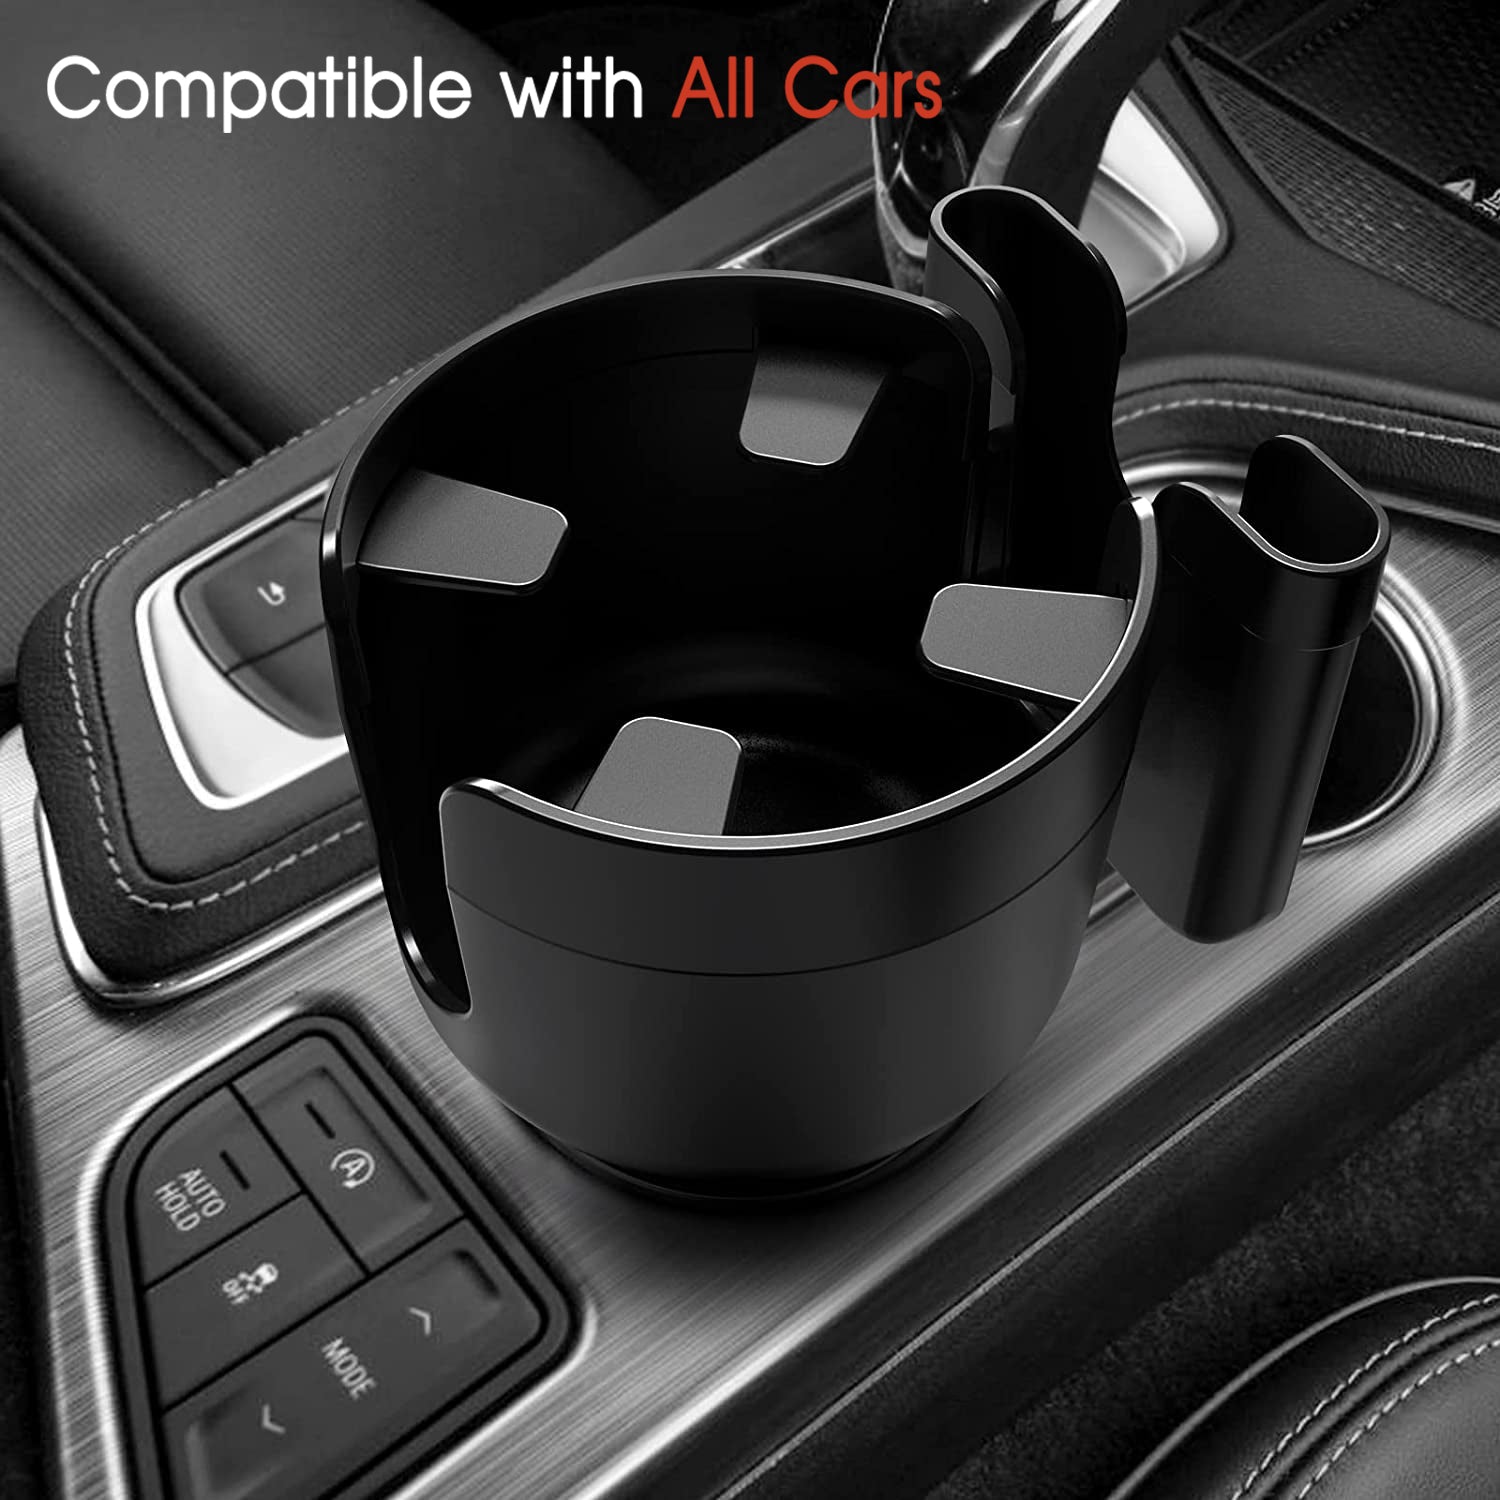 Custom Text For Car Cup Holder 2-in-1, Custom For Your Cars, Car Cup Holder Expander Adapter with Adjustable Base, Car Cup Holder Expander Organizer with Phone Holder LI15988